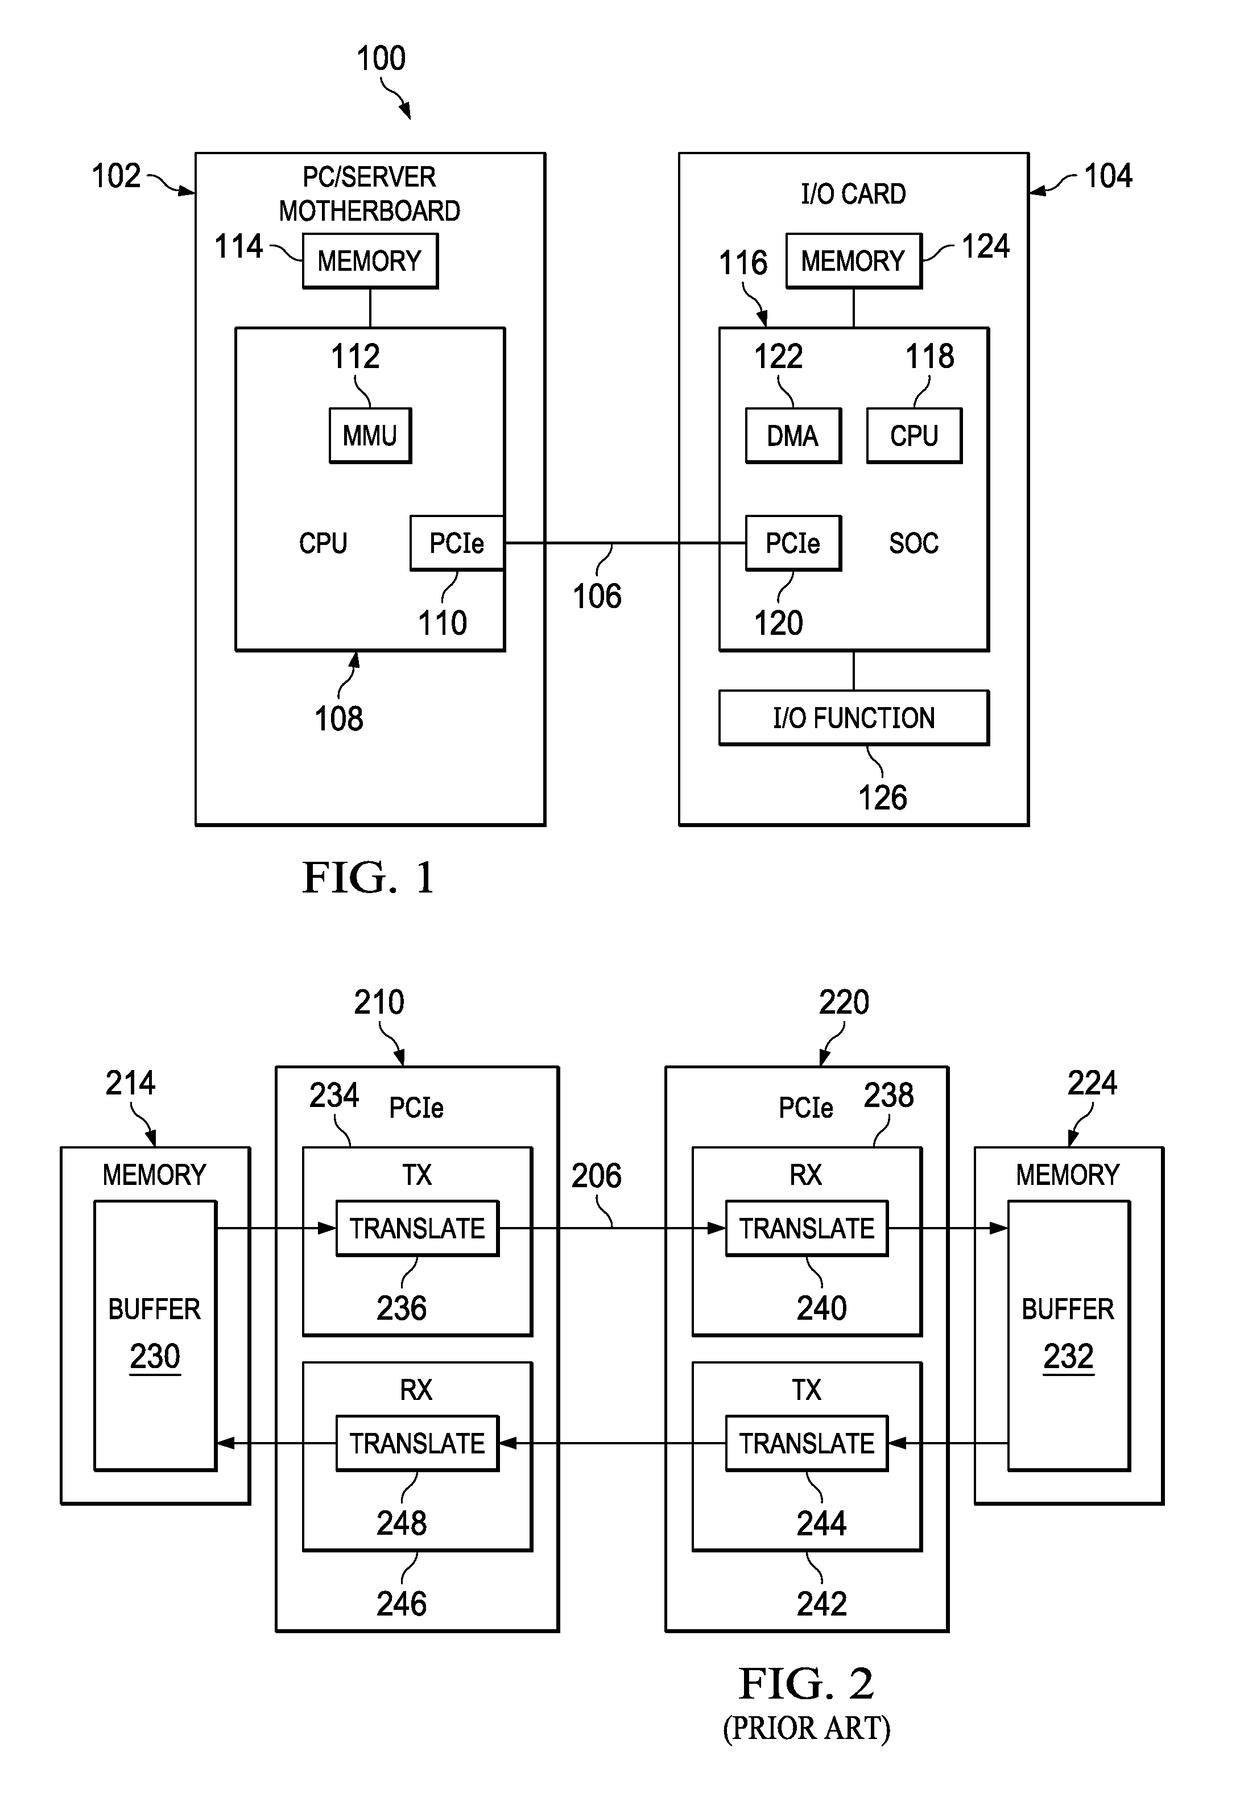 Apparatus and Mechanism to Bypass PCIe Address Translation By Using Alternative Routing